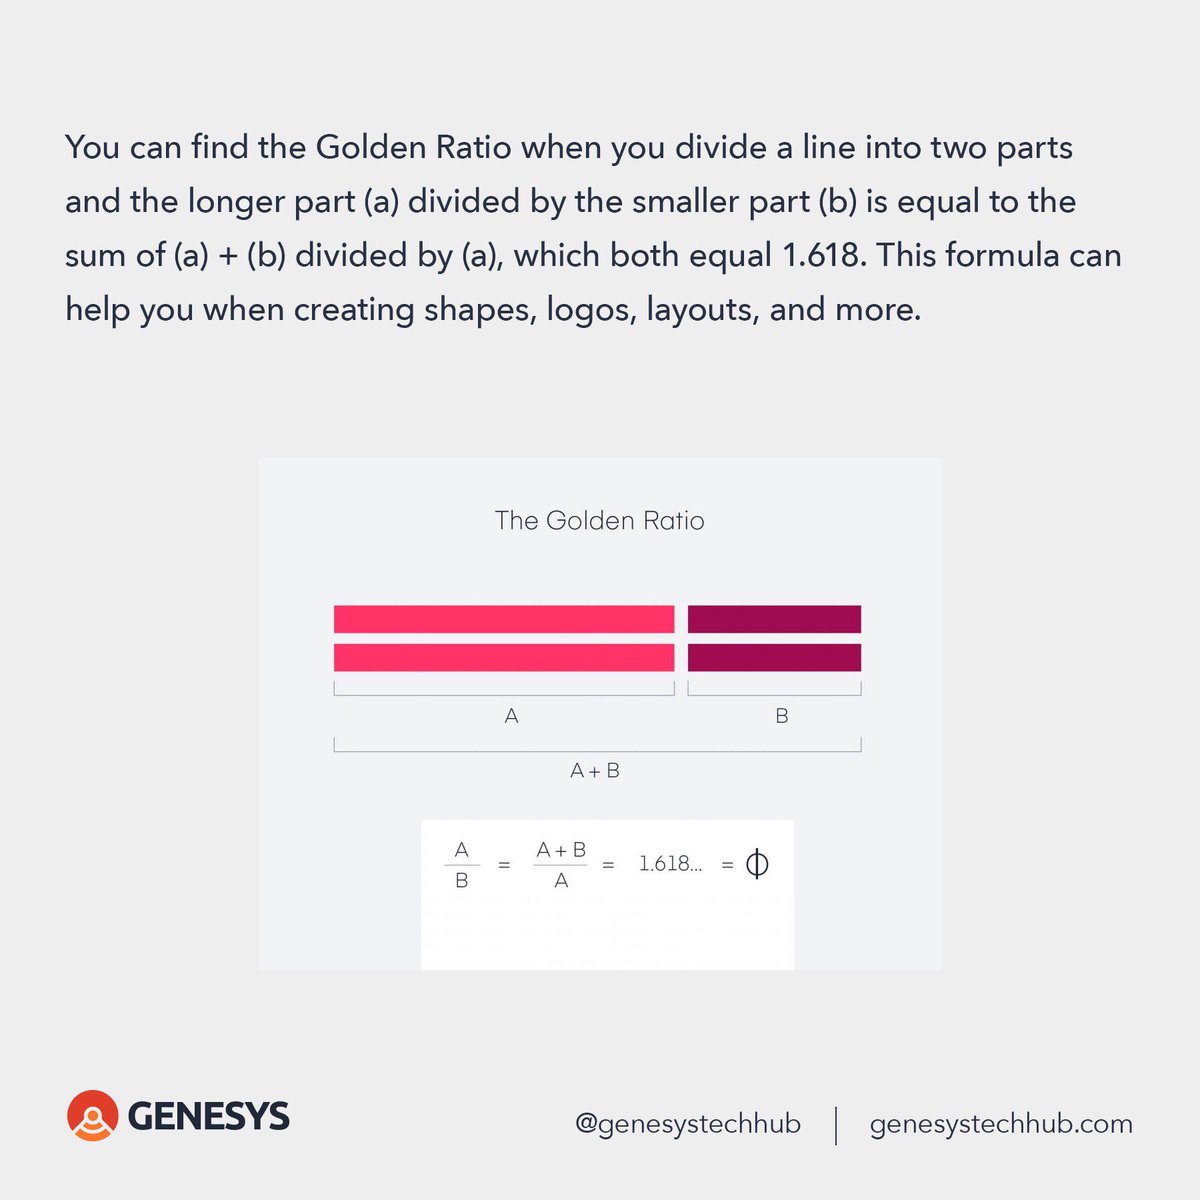 Hey guys!Thanks to David, our amazing head of product design, we are starting a Product Design Learning Series called  #DesignWithMong where we’ll examine all things design. Today we begin with Golden Ratios! #weAreGenesys  #GoldenRatio  #DesignWithMong  #designthinking